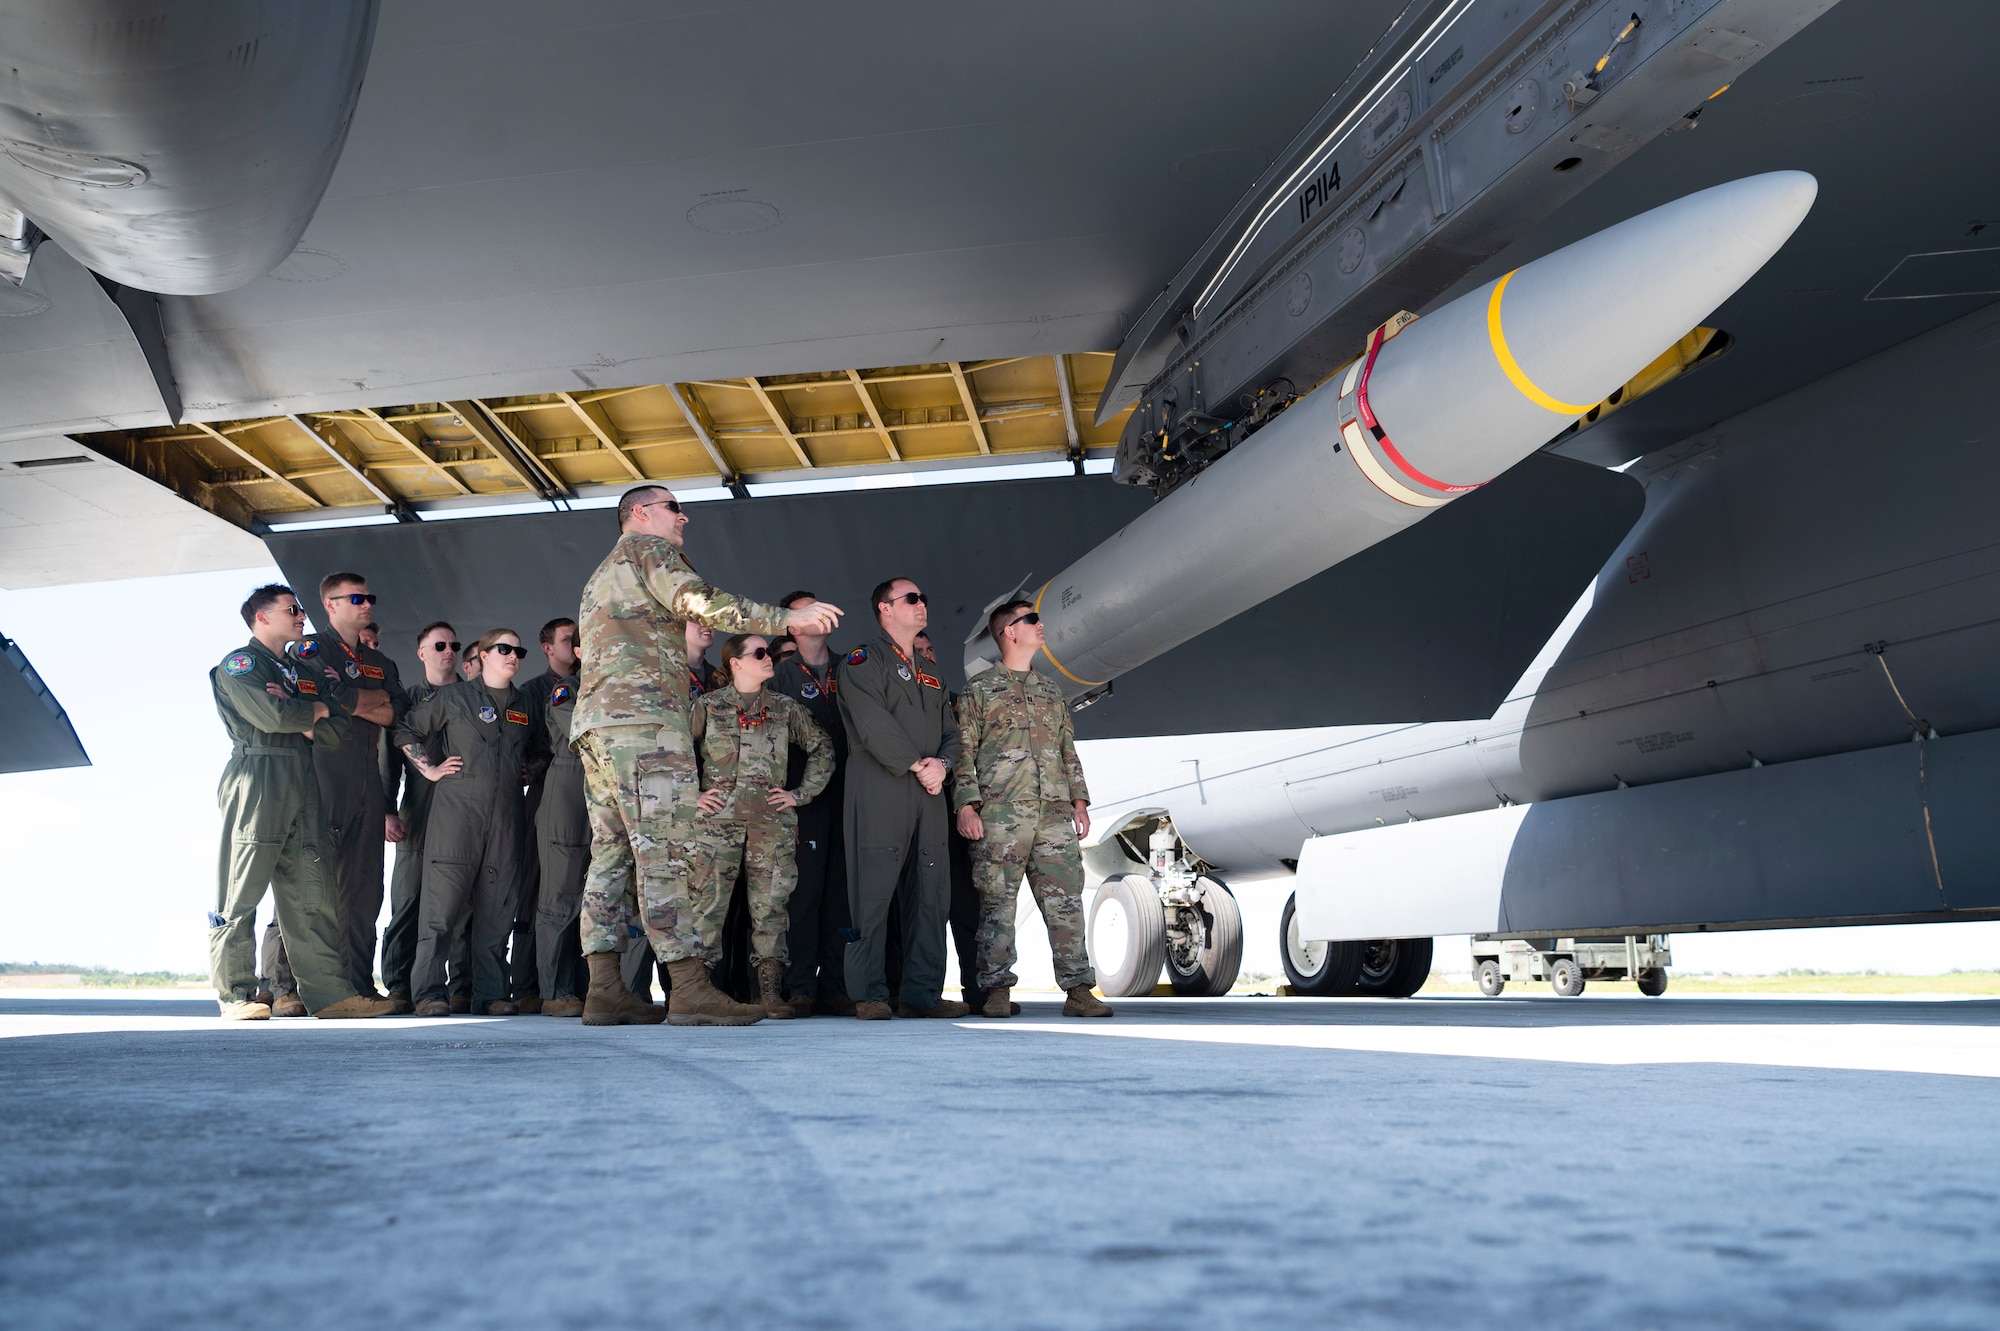 B-52 Stratofortress crews from the 23rd Expeditionary Bomb Squadron, Minot Air Force Base, North Dakota and the 49th Test and Evaluation Squadron, Barksdale Air Force Base, Louisiana, participated in hypersonic weapon familiarization training at Andersen Air Force Base, Guam, Feb. 27, 2024. The Department of Defense is developing hypersonic science and technology to ensure the U.S. can rapidly transition operational hypersonic systems. (U.S. Air Force photo by Staff Sgt. Pedro Tenorio)